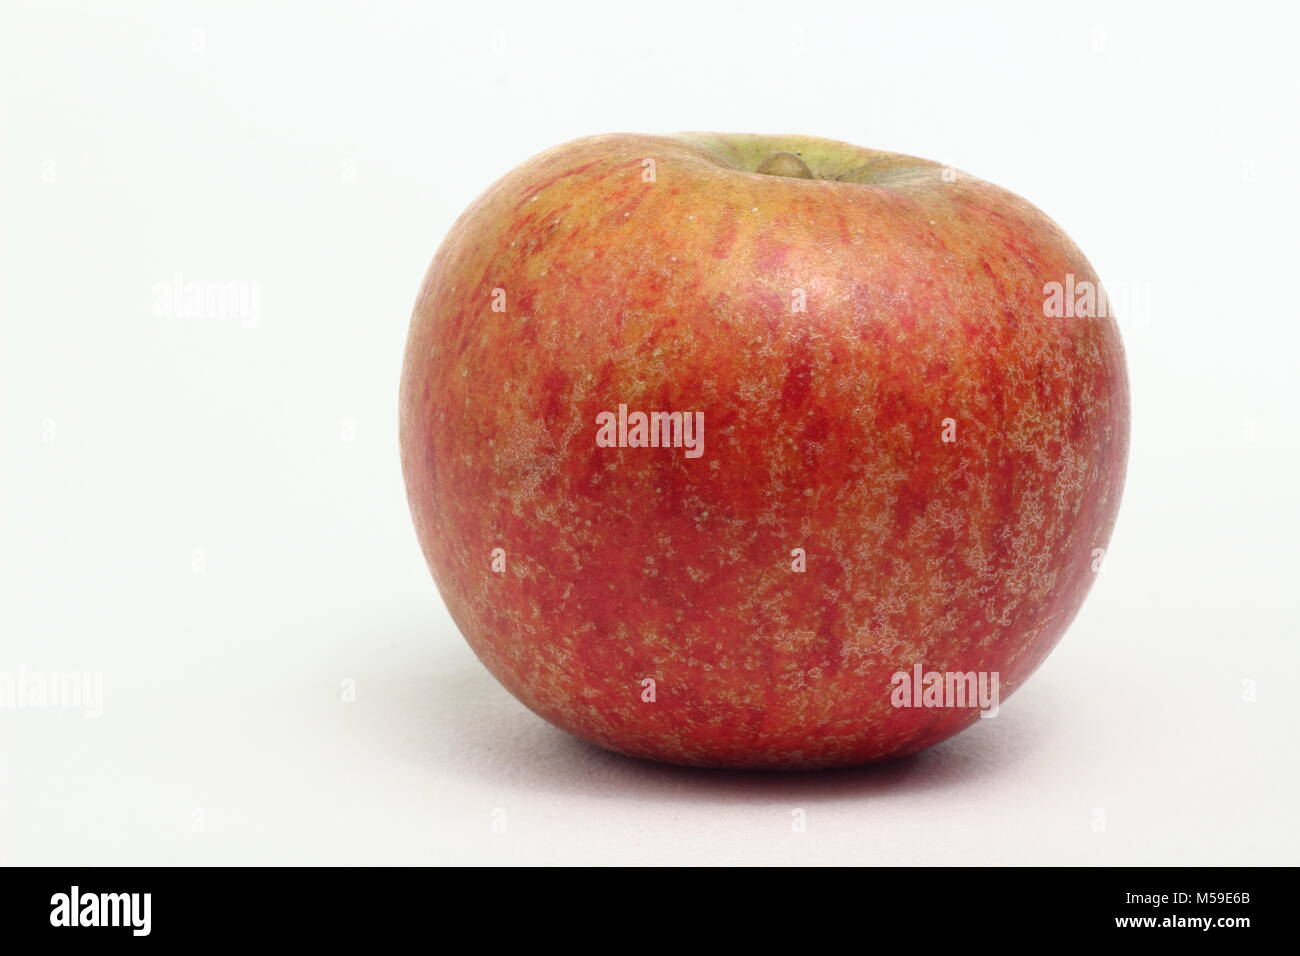 Malus domestica 'Worcester Pearmain', an English apple variety, white background, UK Stock Photo